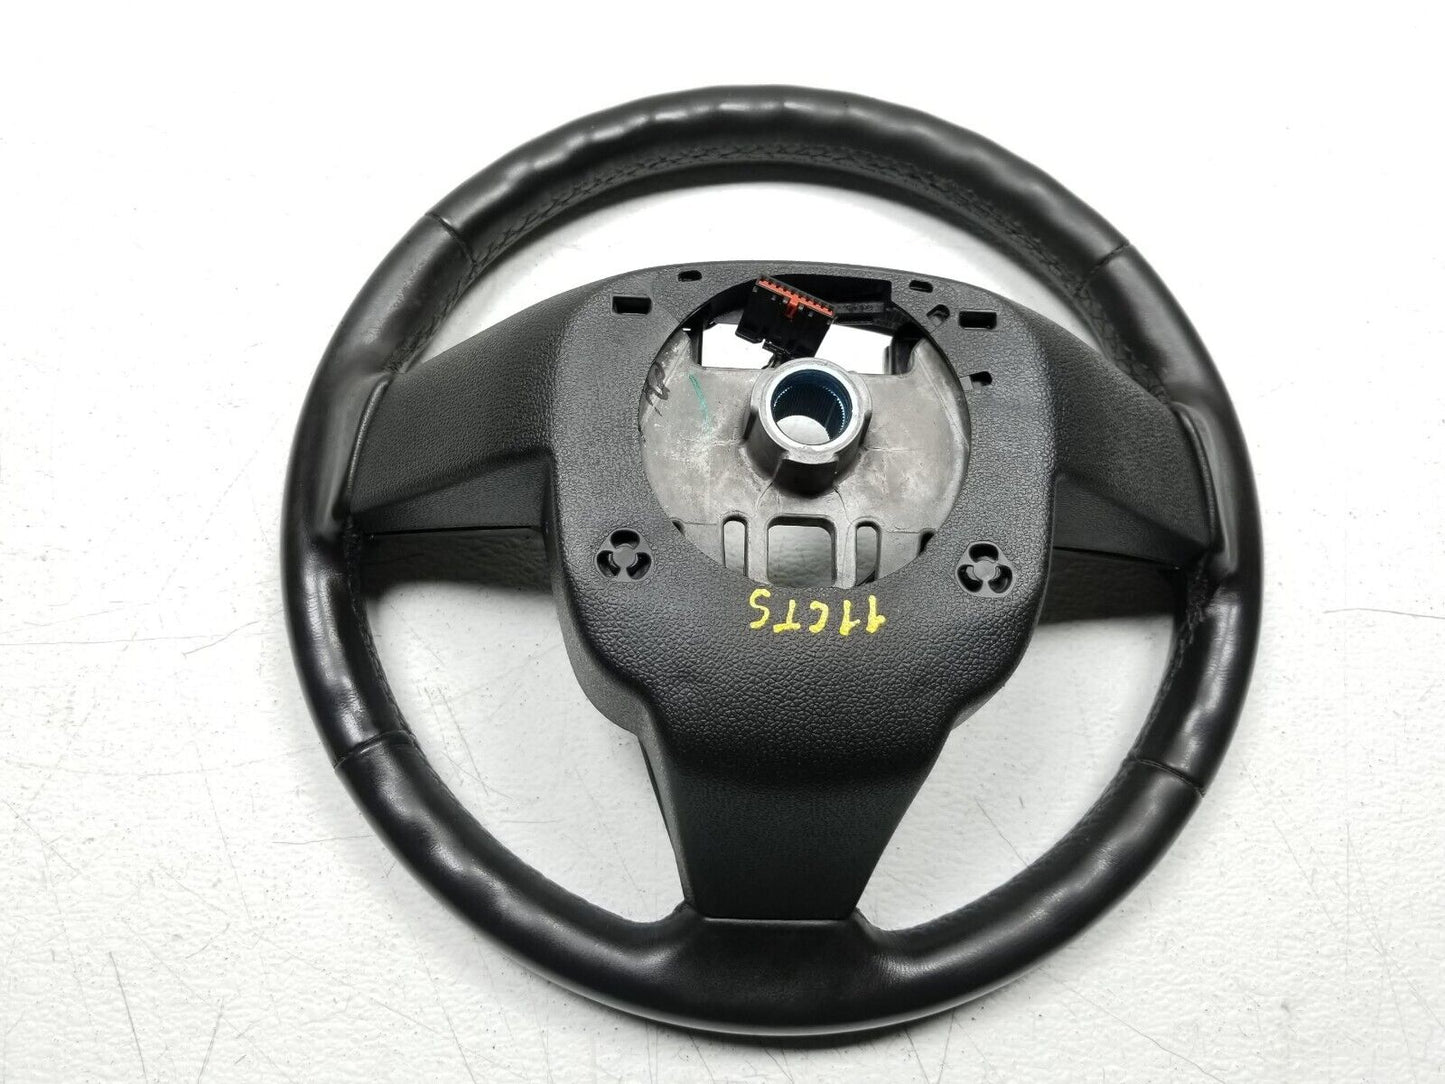 2011 - 2014 Cadillac CTS Coupe Steering Wheel OEM